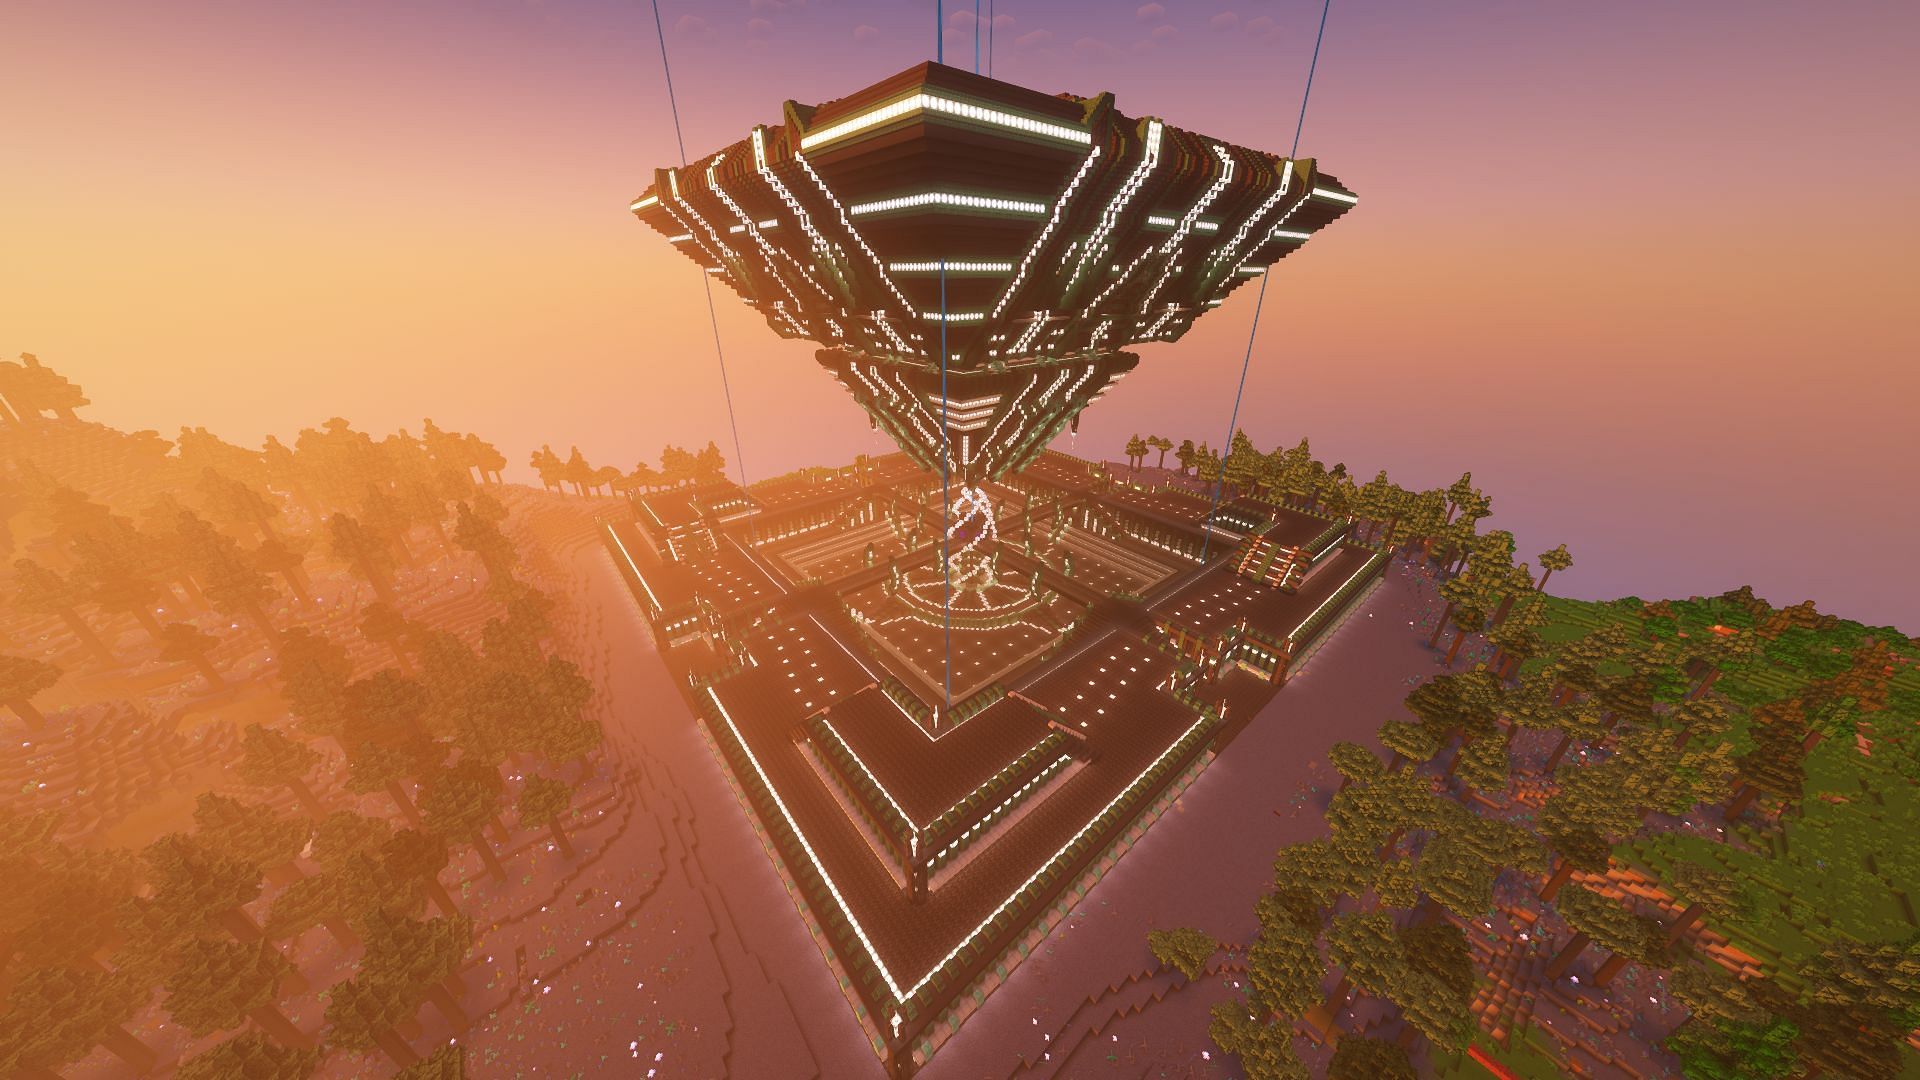 Pyramids are a natural choice of mega build for many players (Image via Reddit user u/Mineragge)